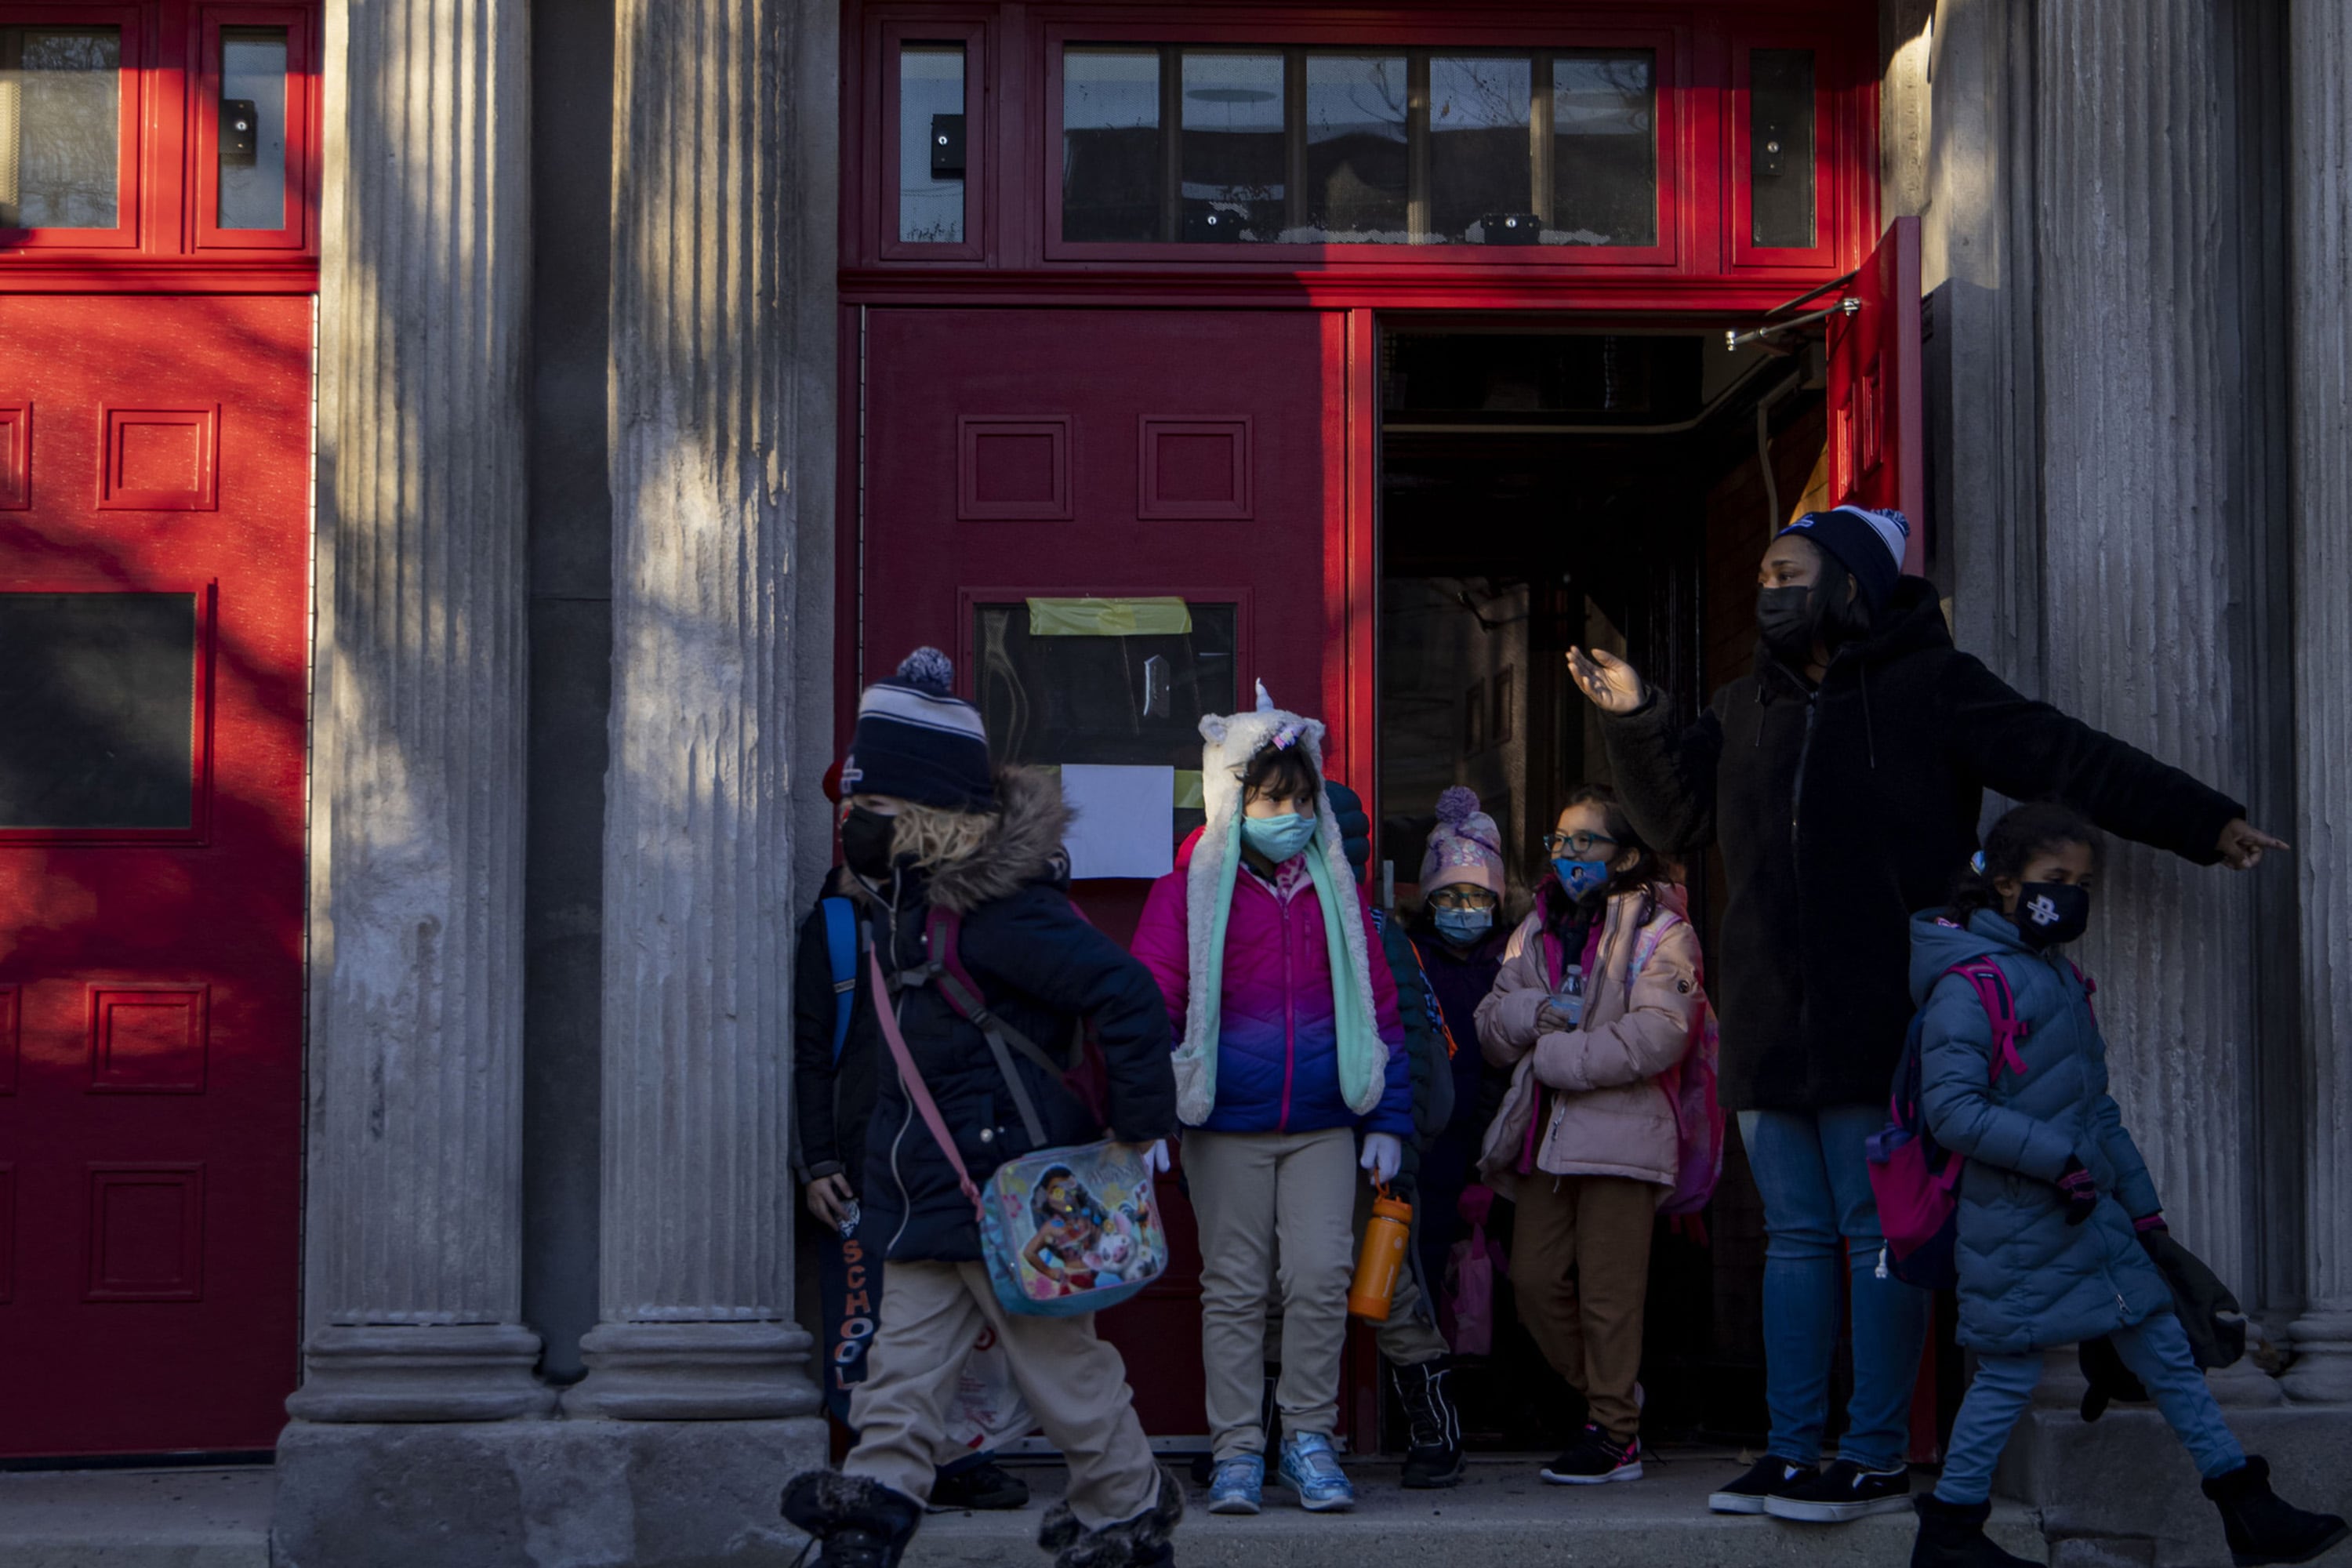 Children are bundled up in winter coats as they leave a Chicago school building in January.